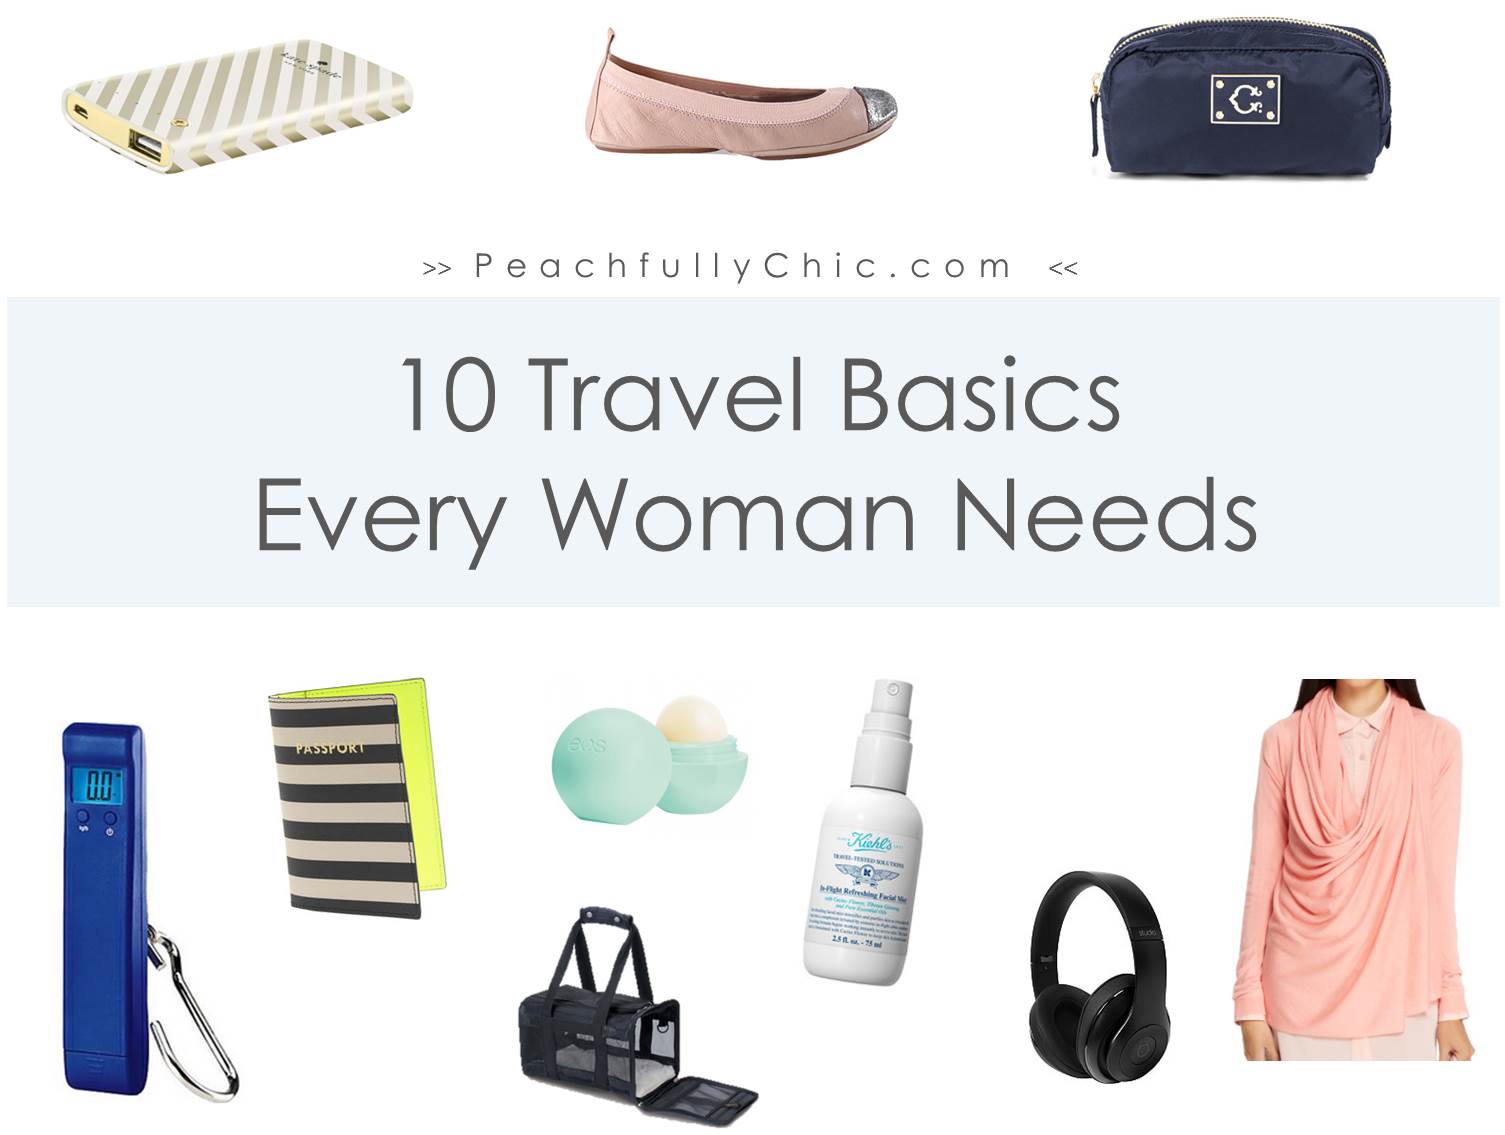 top-travel-items-every-woman-needs-peachfully-chic-main-1a